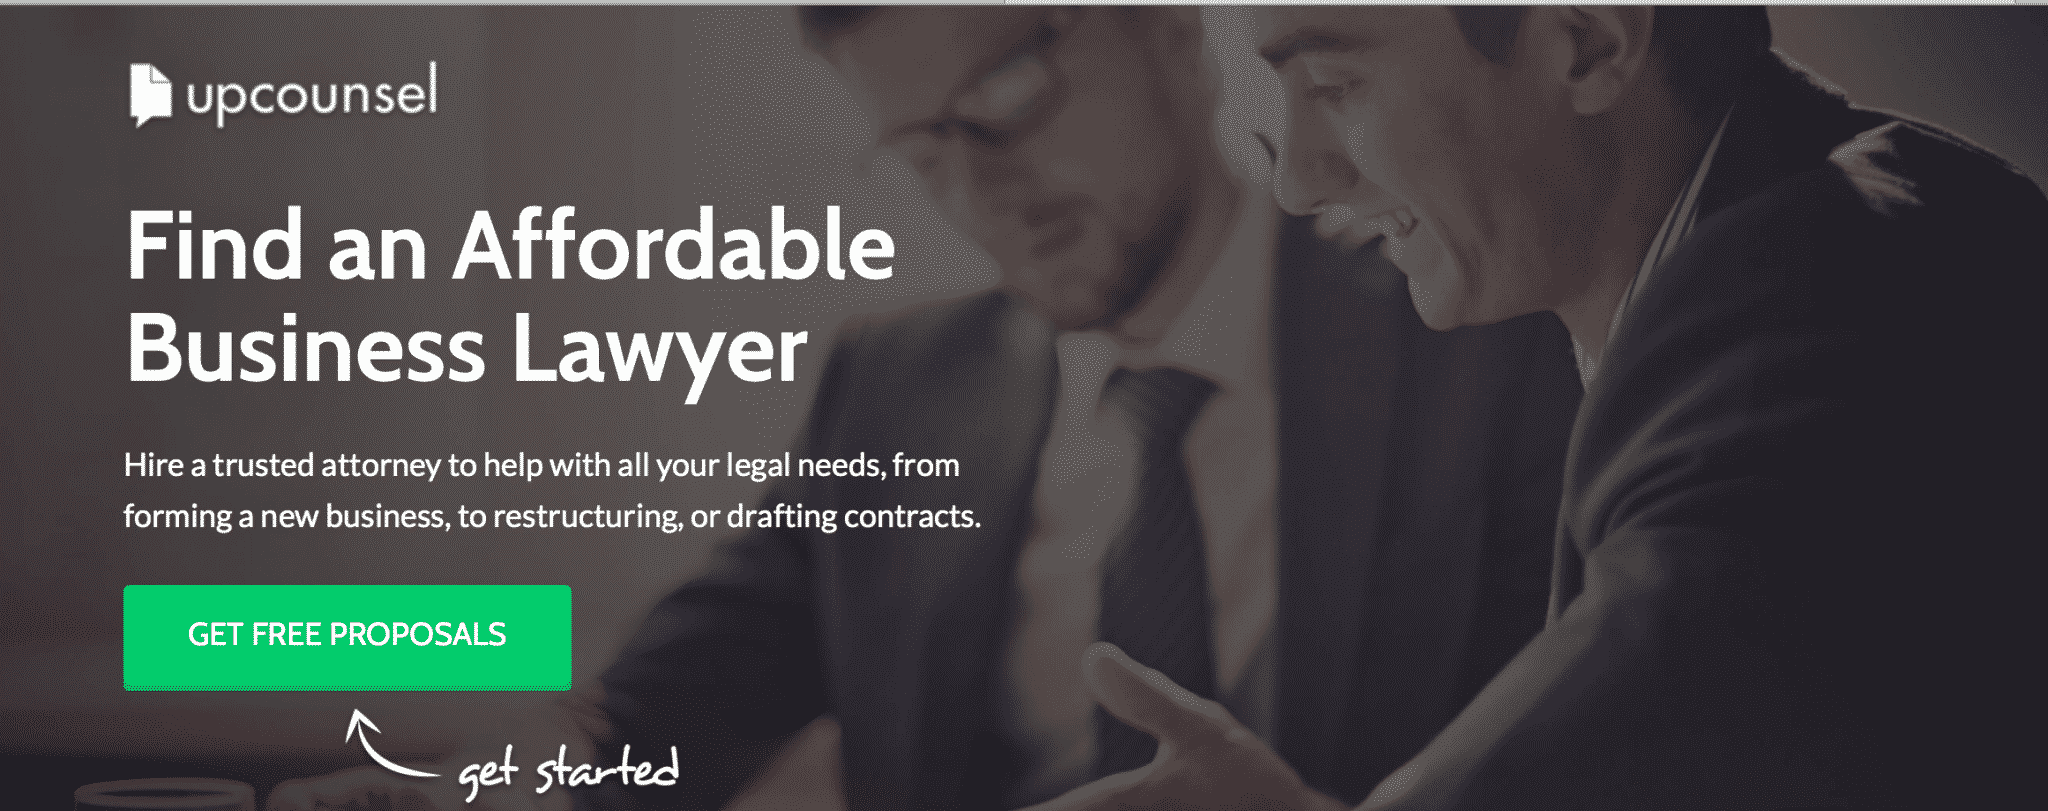 landing pages for lawyers